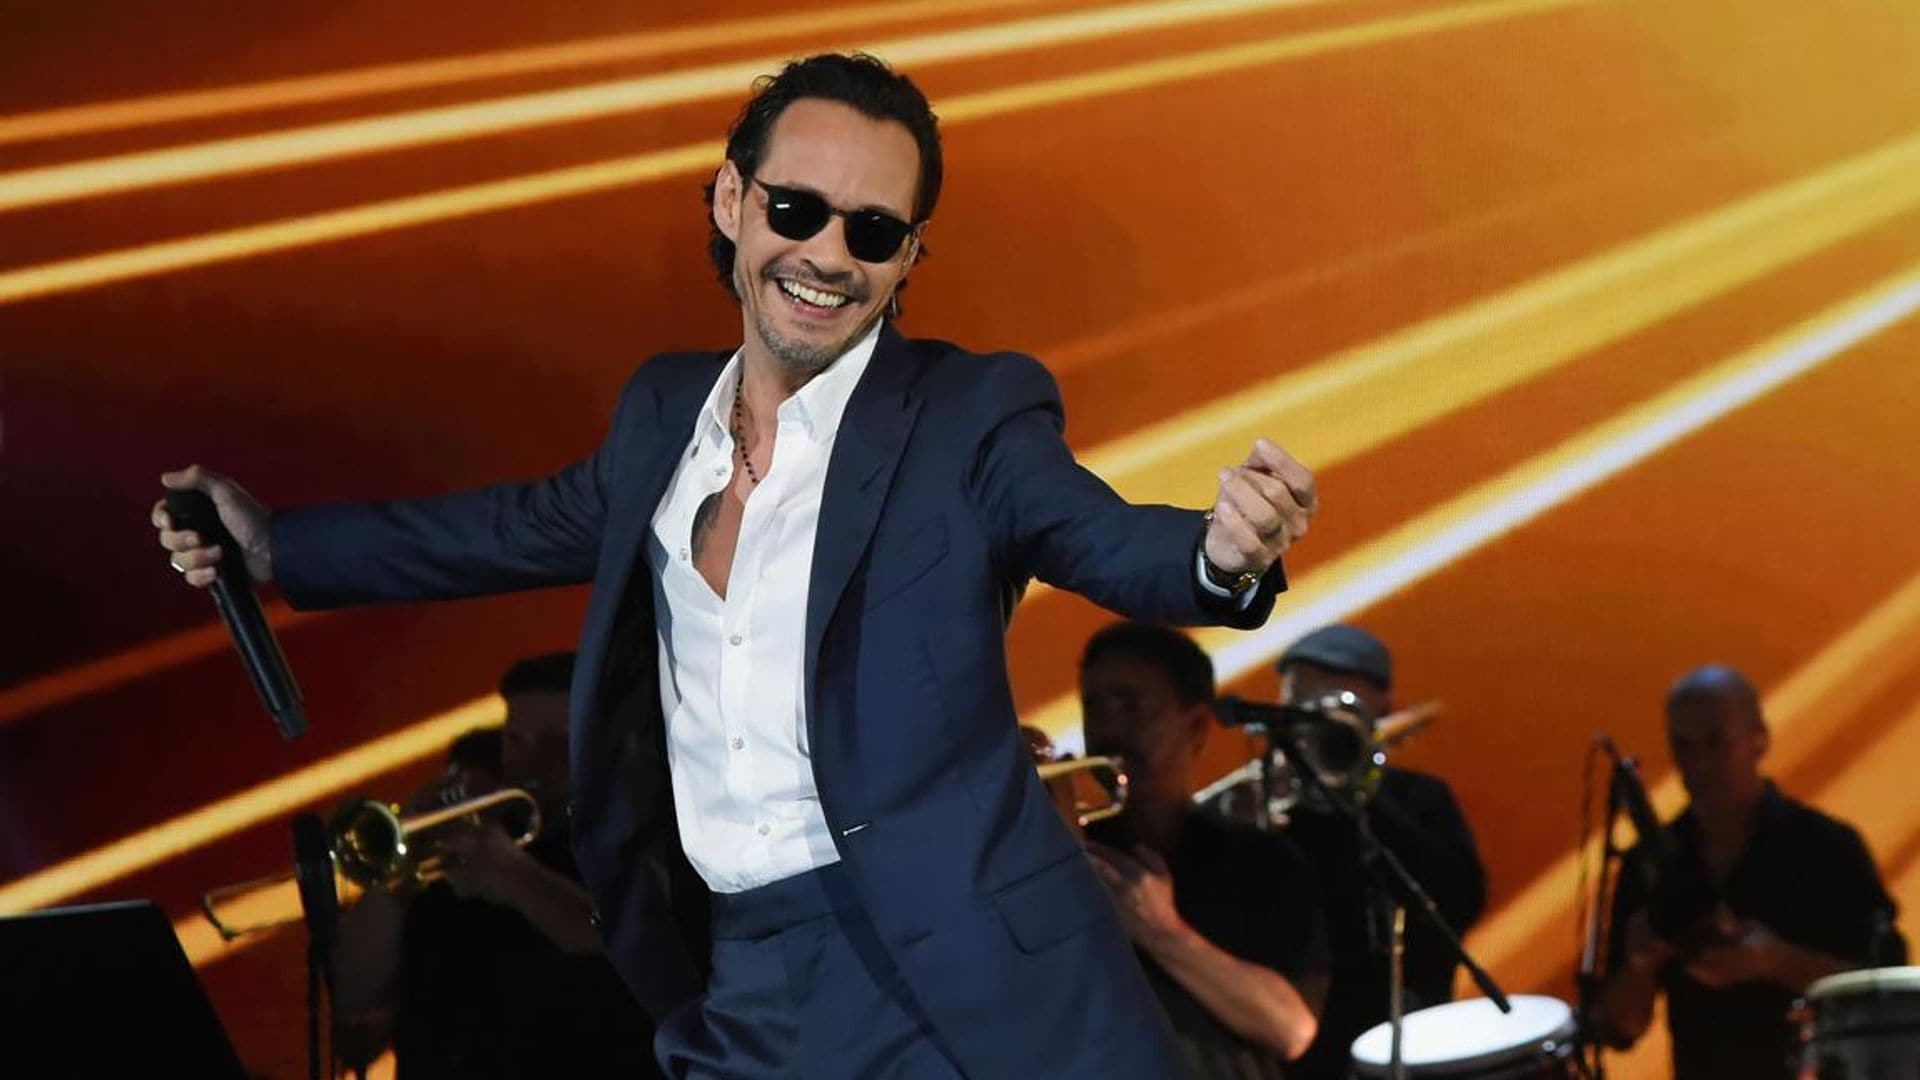 Singer, producer, entrepeneur and world-record breaker: discover Marc Anthony’s net worth